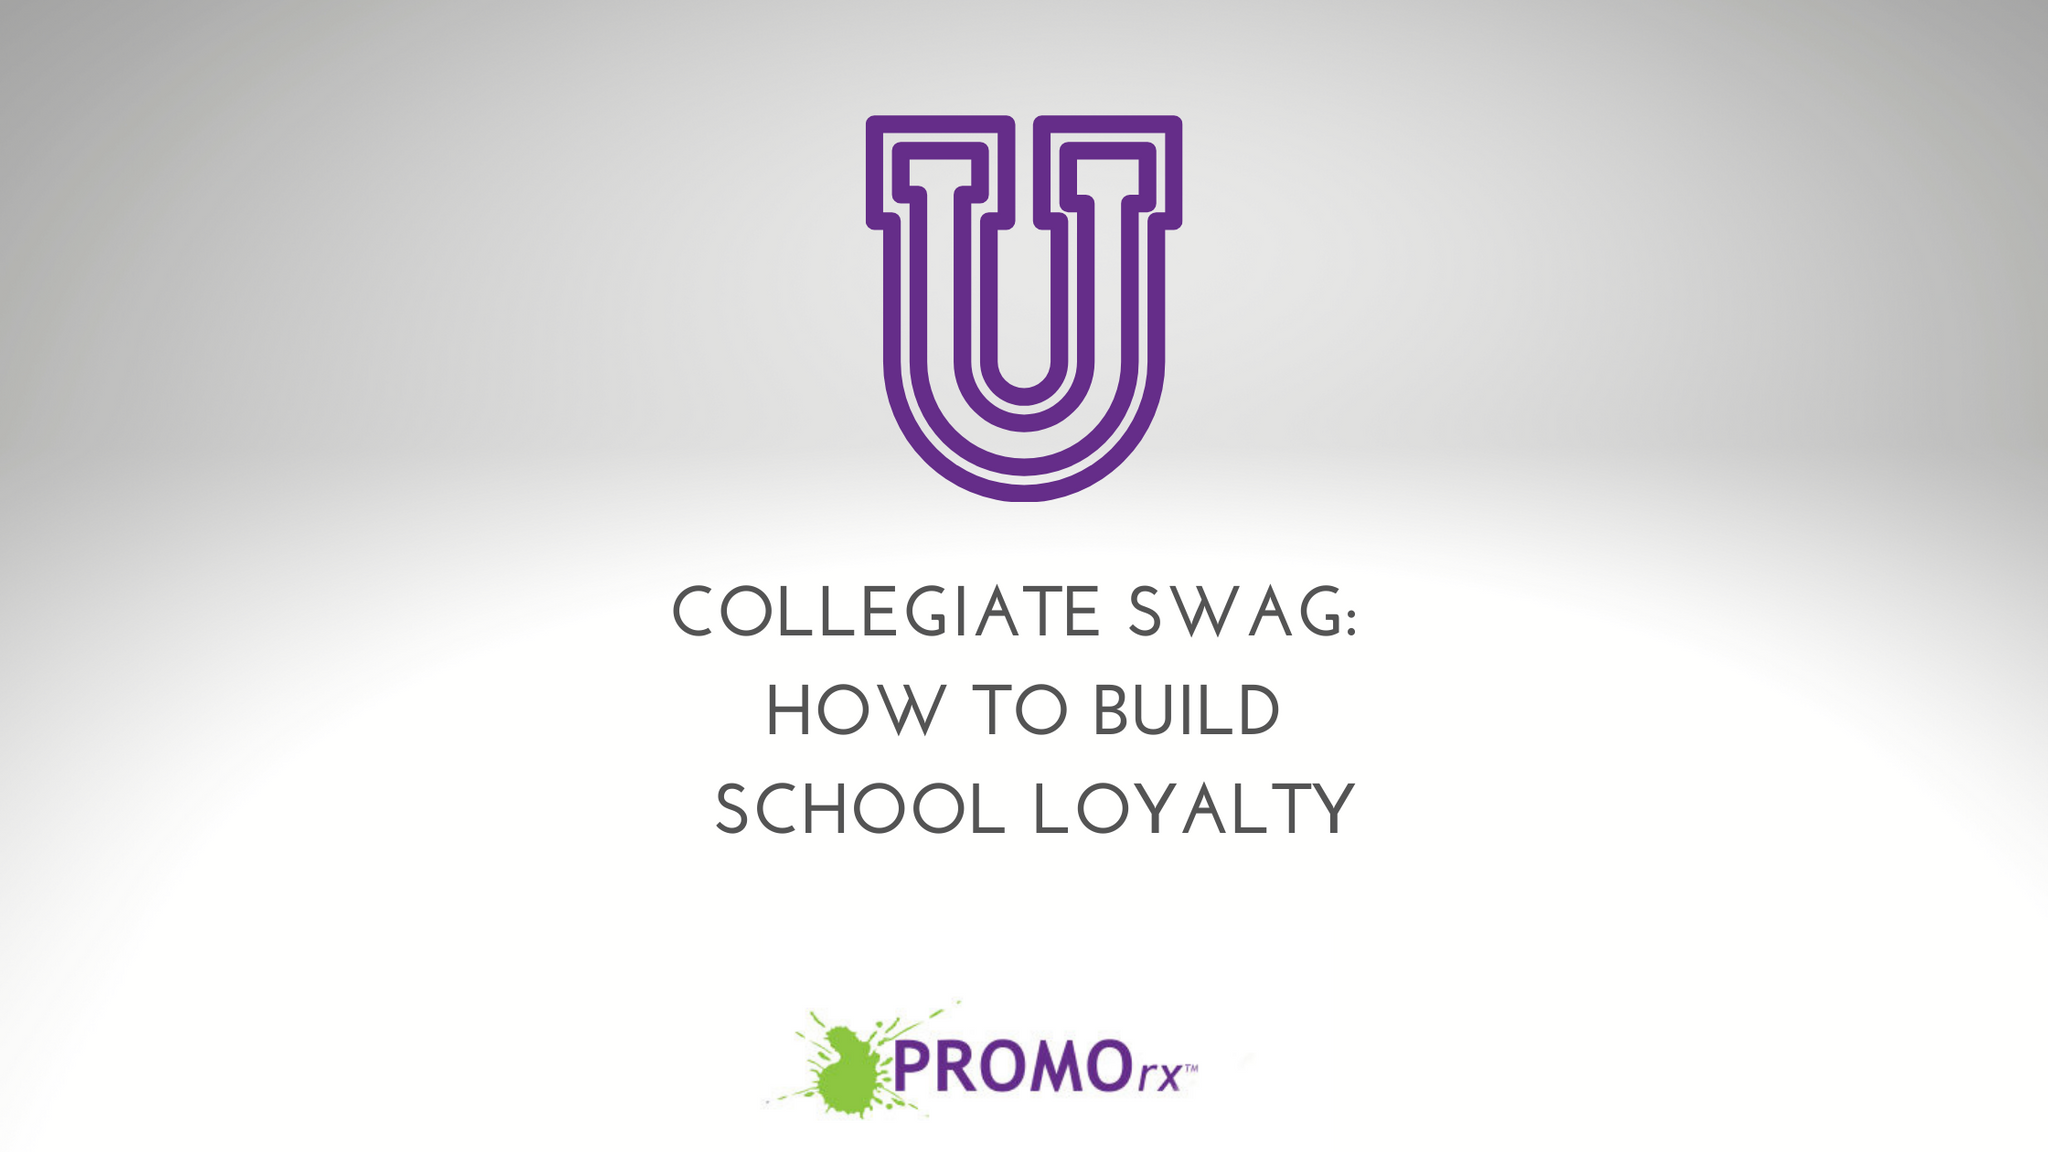 Collegiate Swag: How To Build School Loyalty